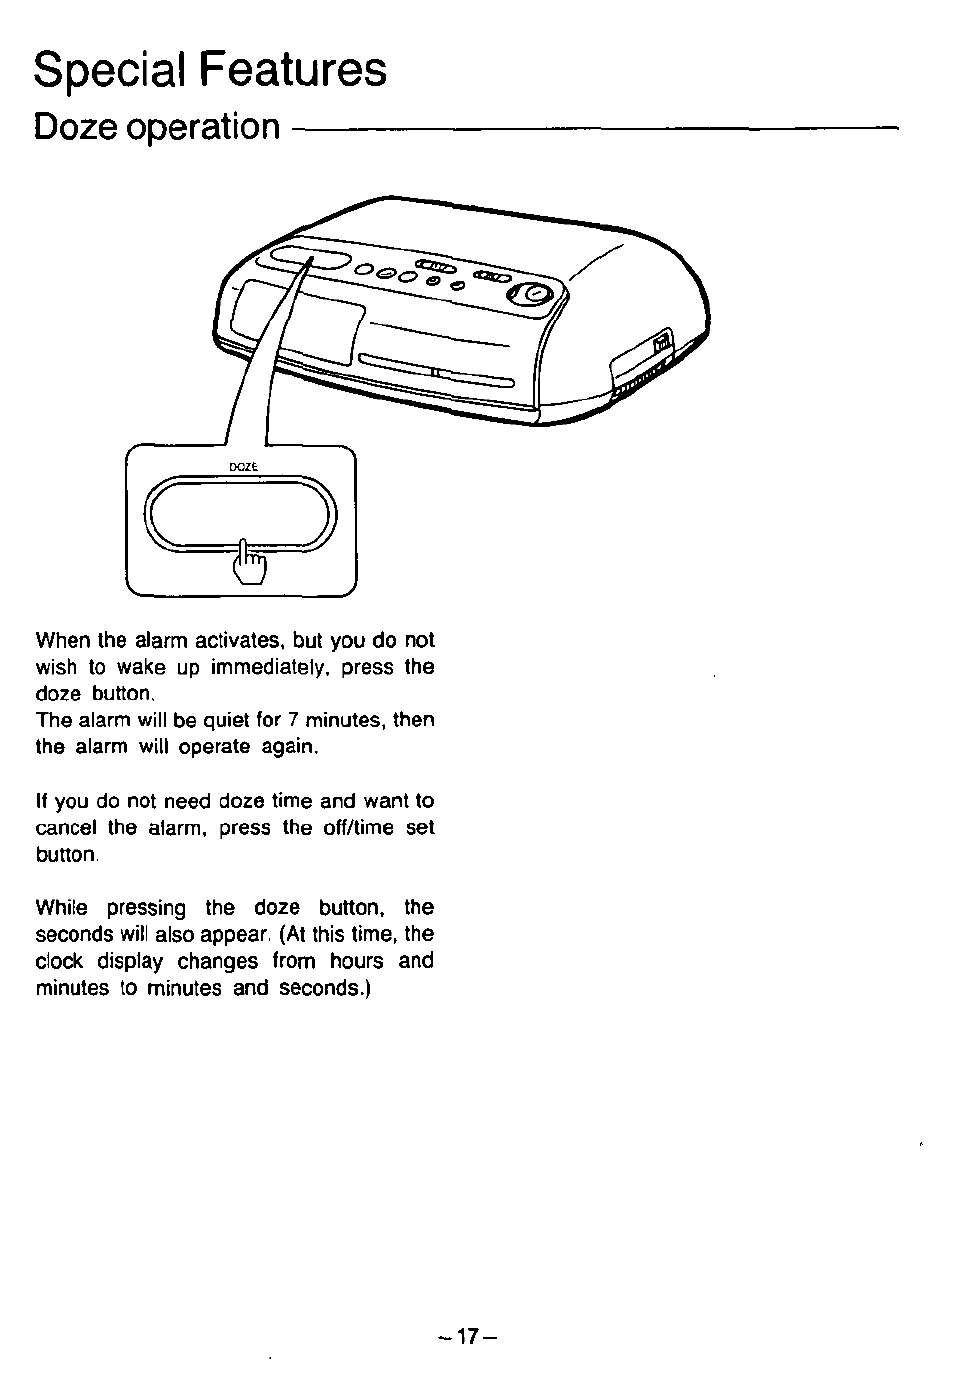 Special features, Doze operation | Panasonic RC6099 User Manual | Page 17 / 20